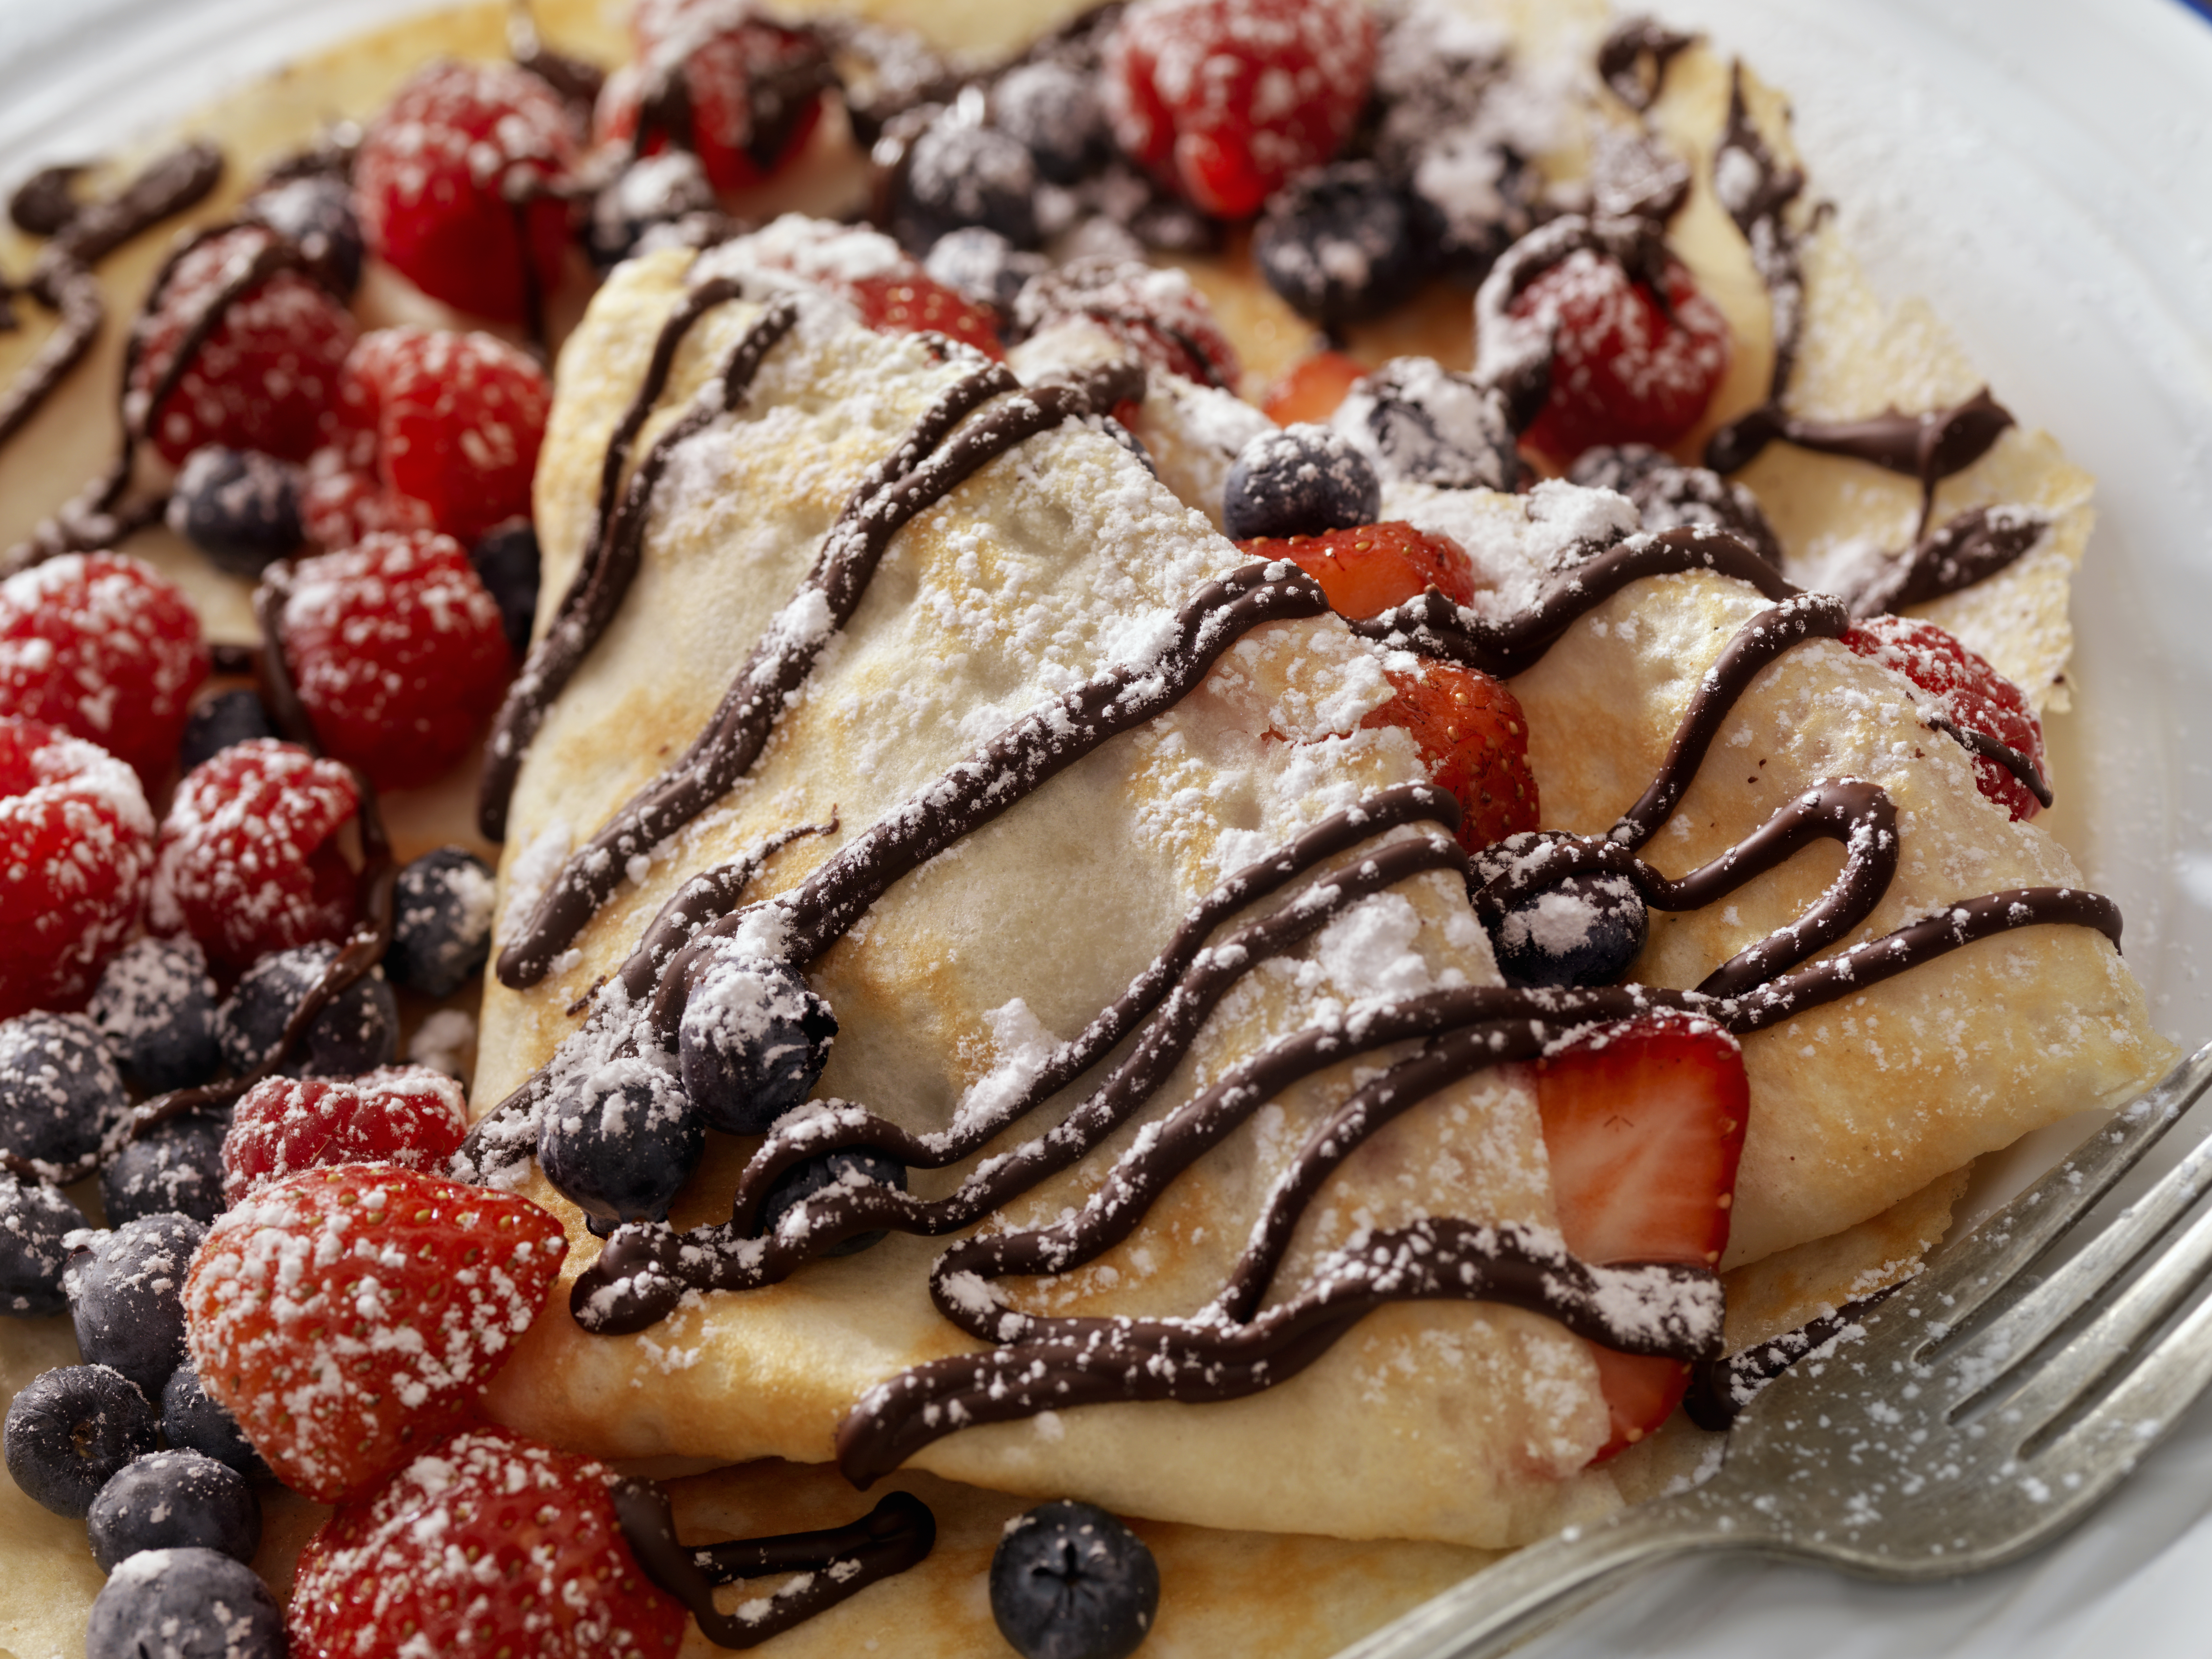 crepe with powdered sugar, chocolate drizzle, and berries